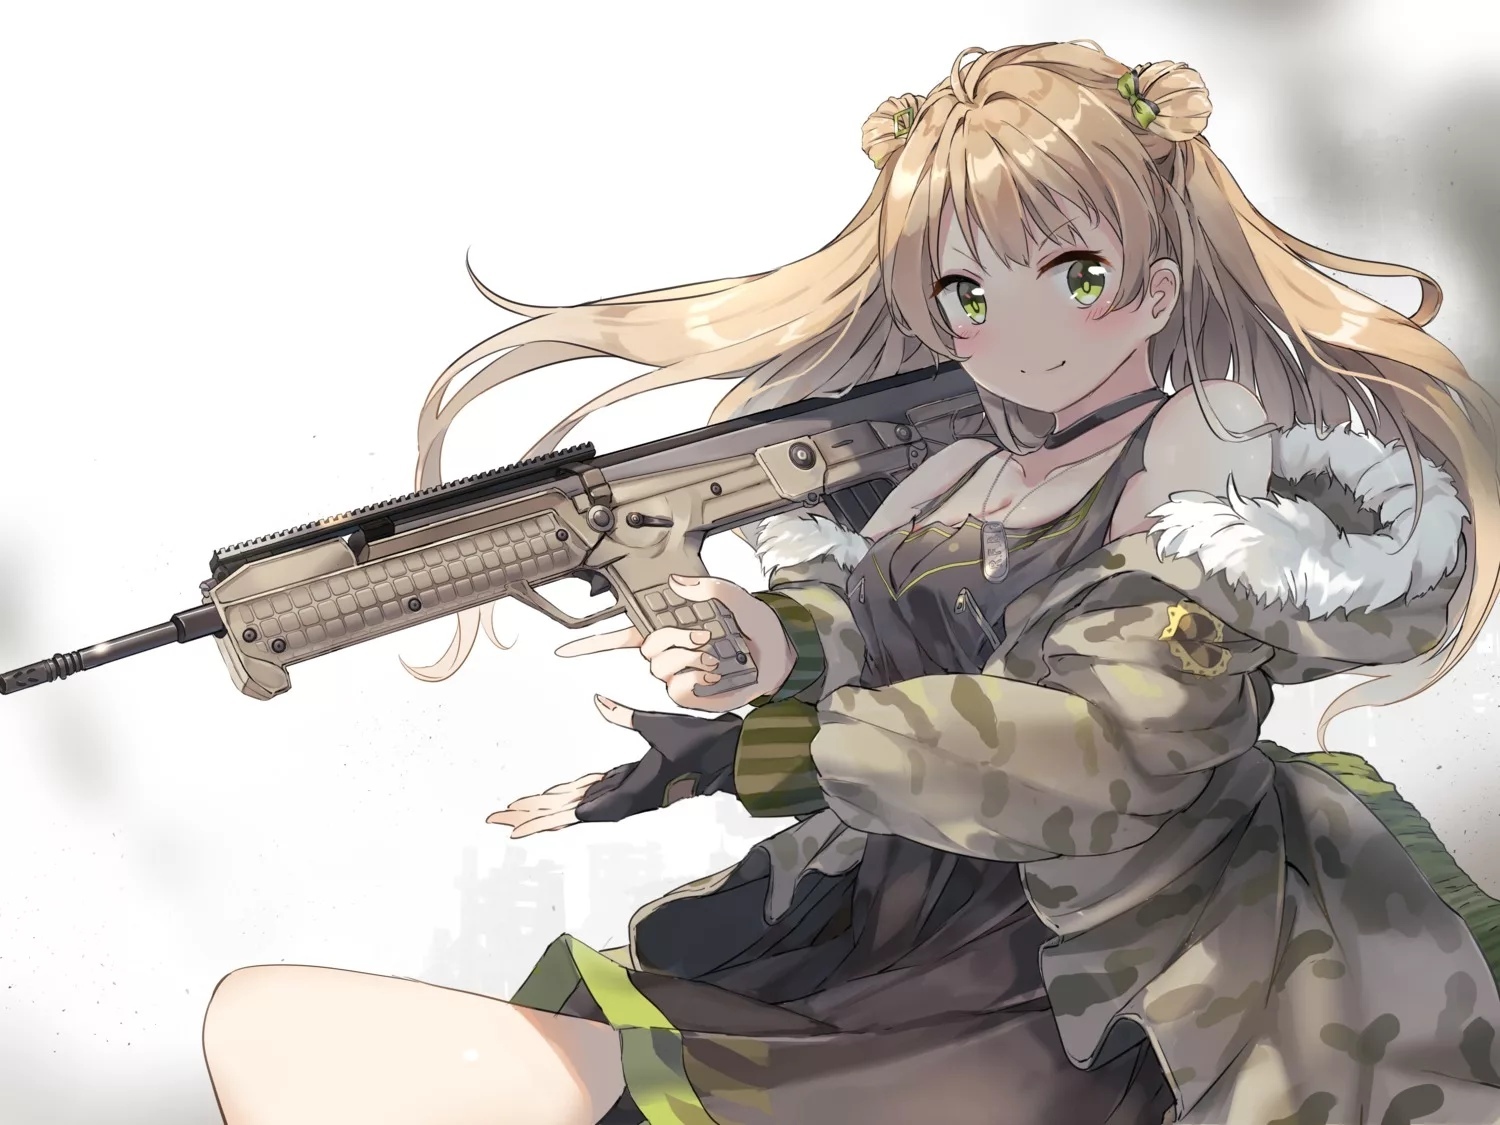 Dream of the day obseries 8 - My, Anime, Girls frontline, Weapon, Text, Story, Rifle, USA, Bullpup, Girls, Kel-Tec rfb